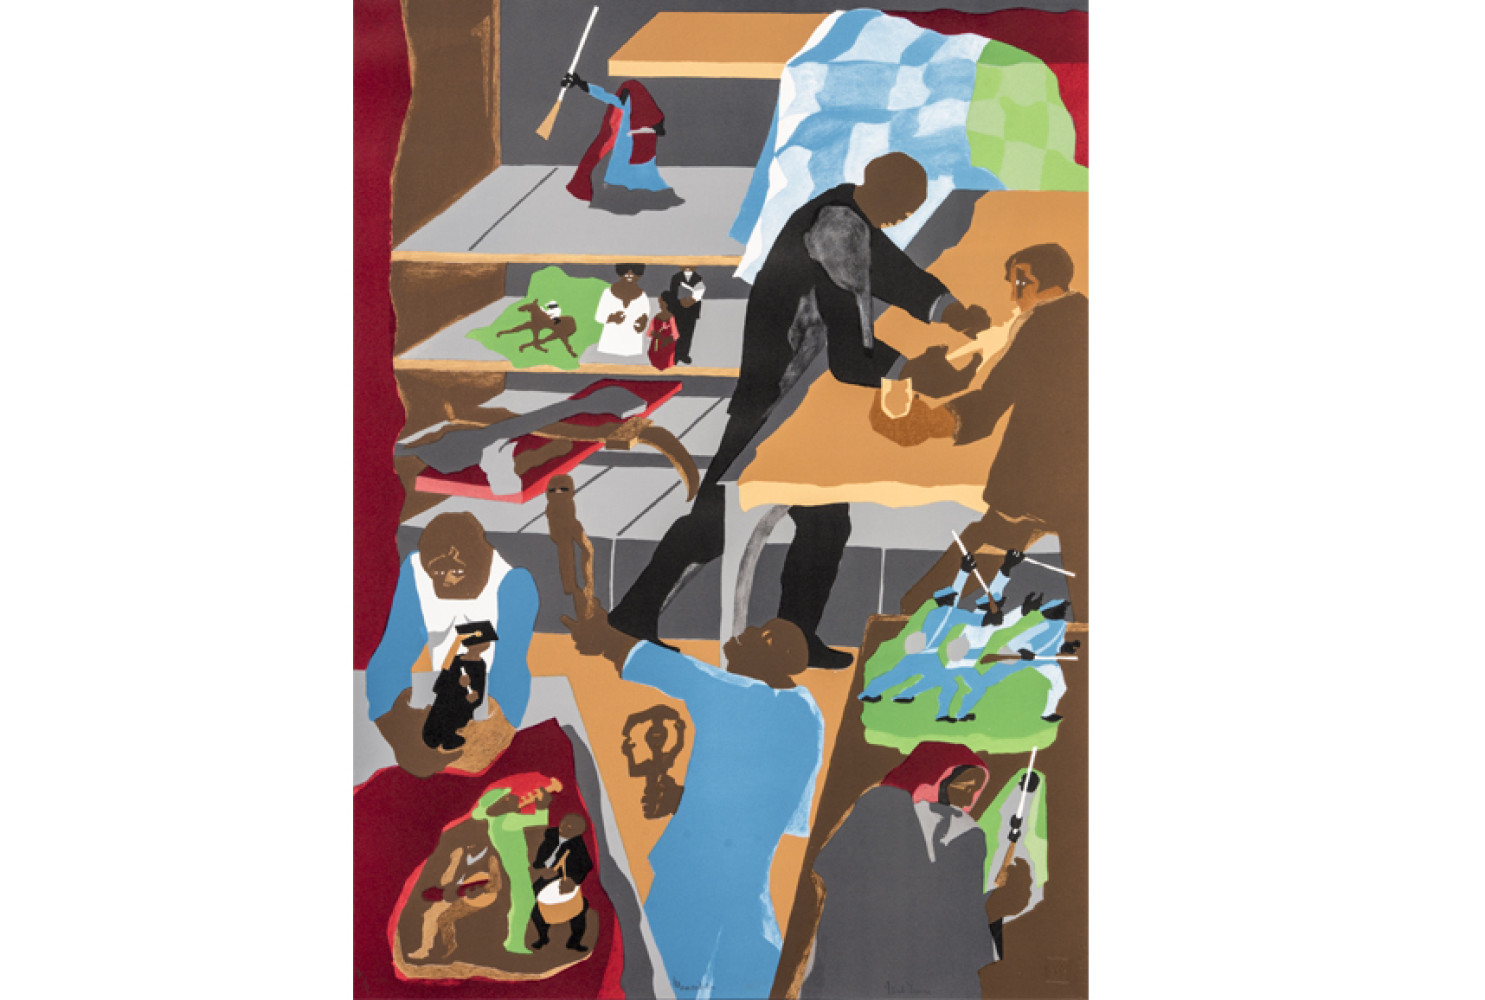 Memorabilia, 1990, by Jacob Lawrence (1917-2000); lithograph on paper, 31 1/4 x 22 7/8 inches; Courtesy of  The Jacob and Gwendolyn Knight Lawrence Foundation, Seattle © 2015 Artists Rights Society (ARS), New York